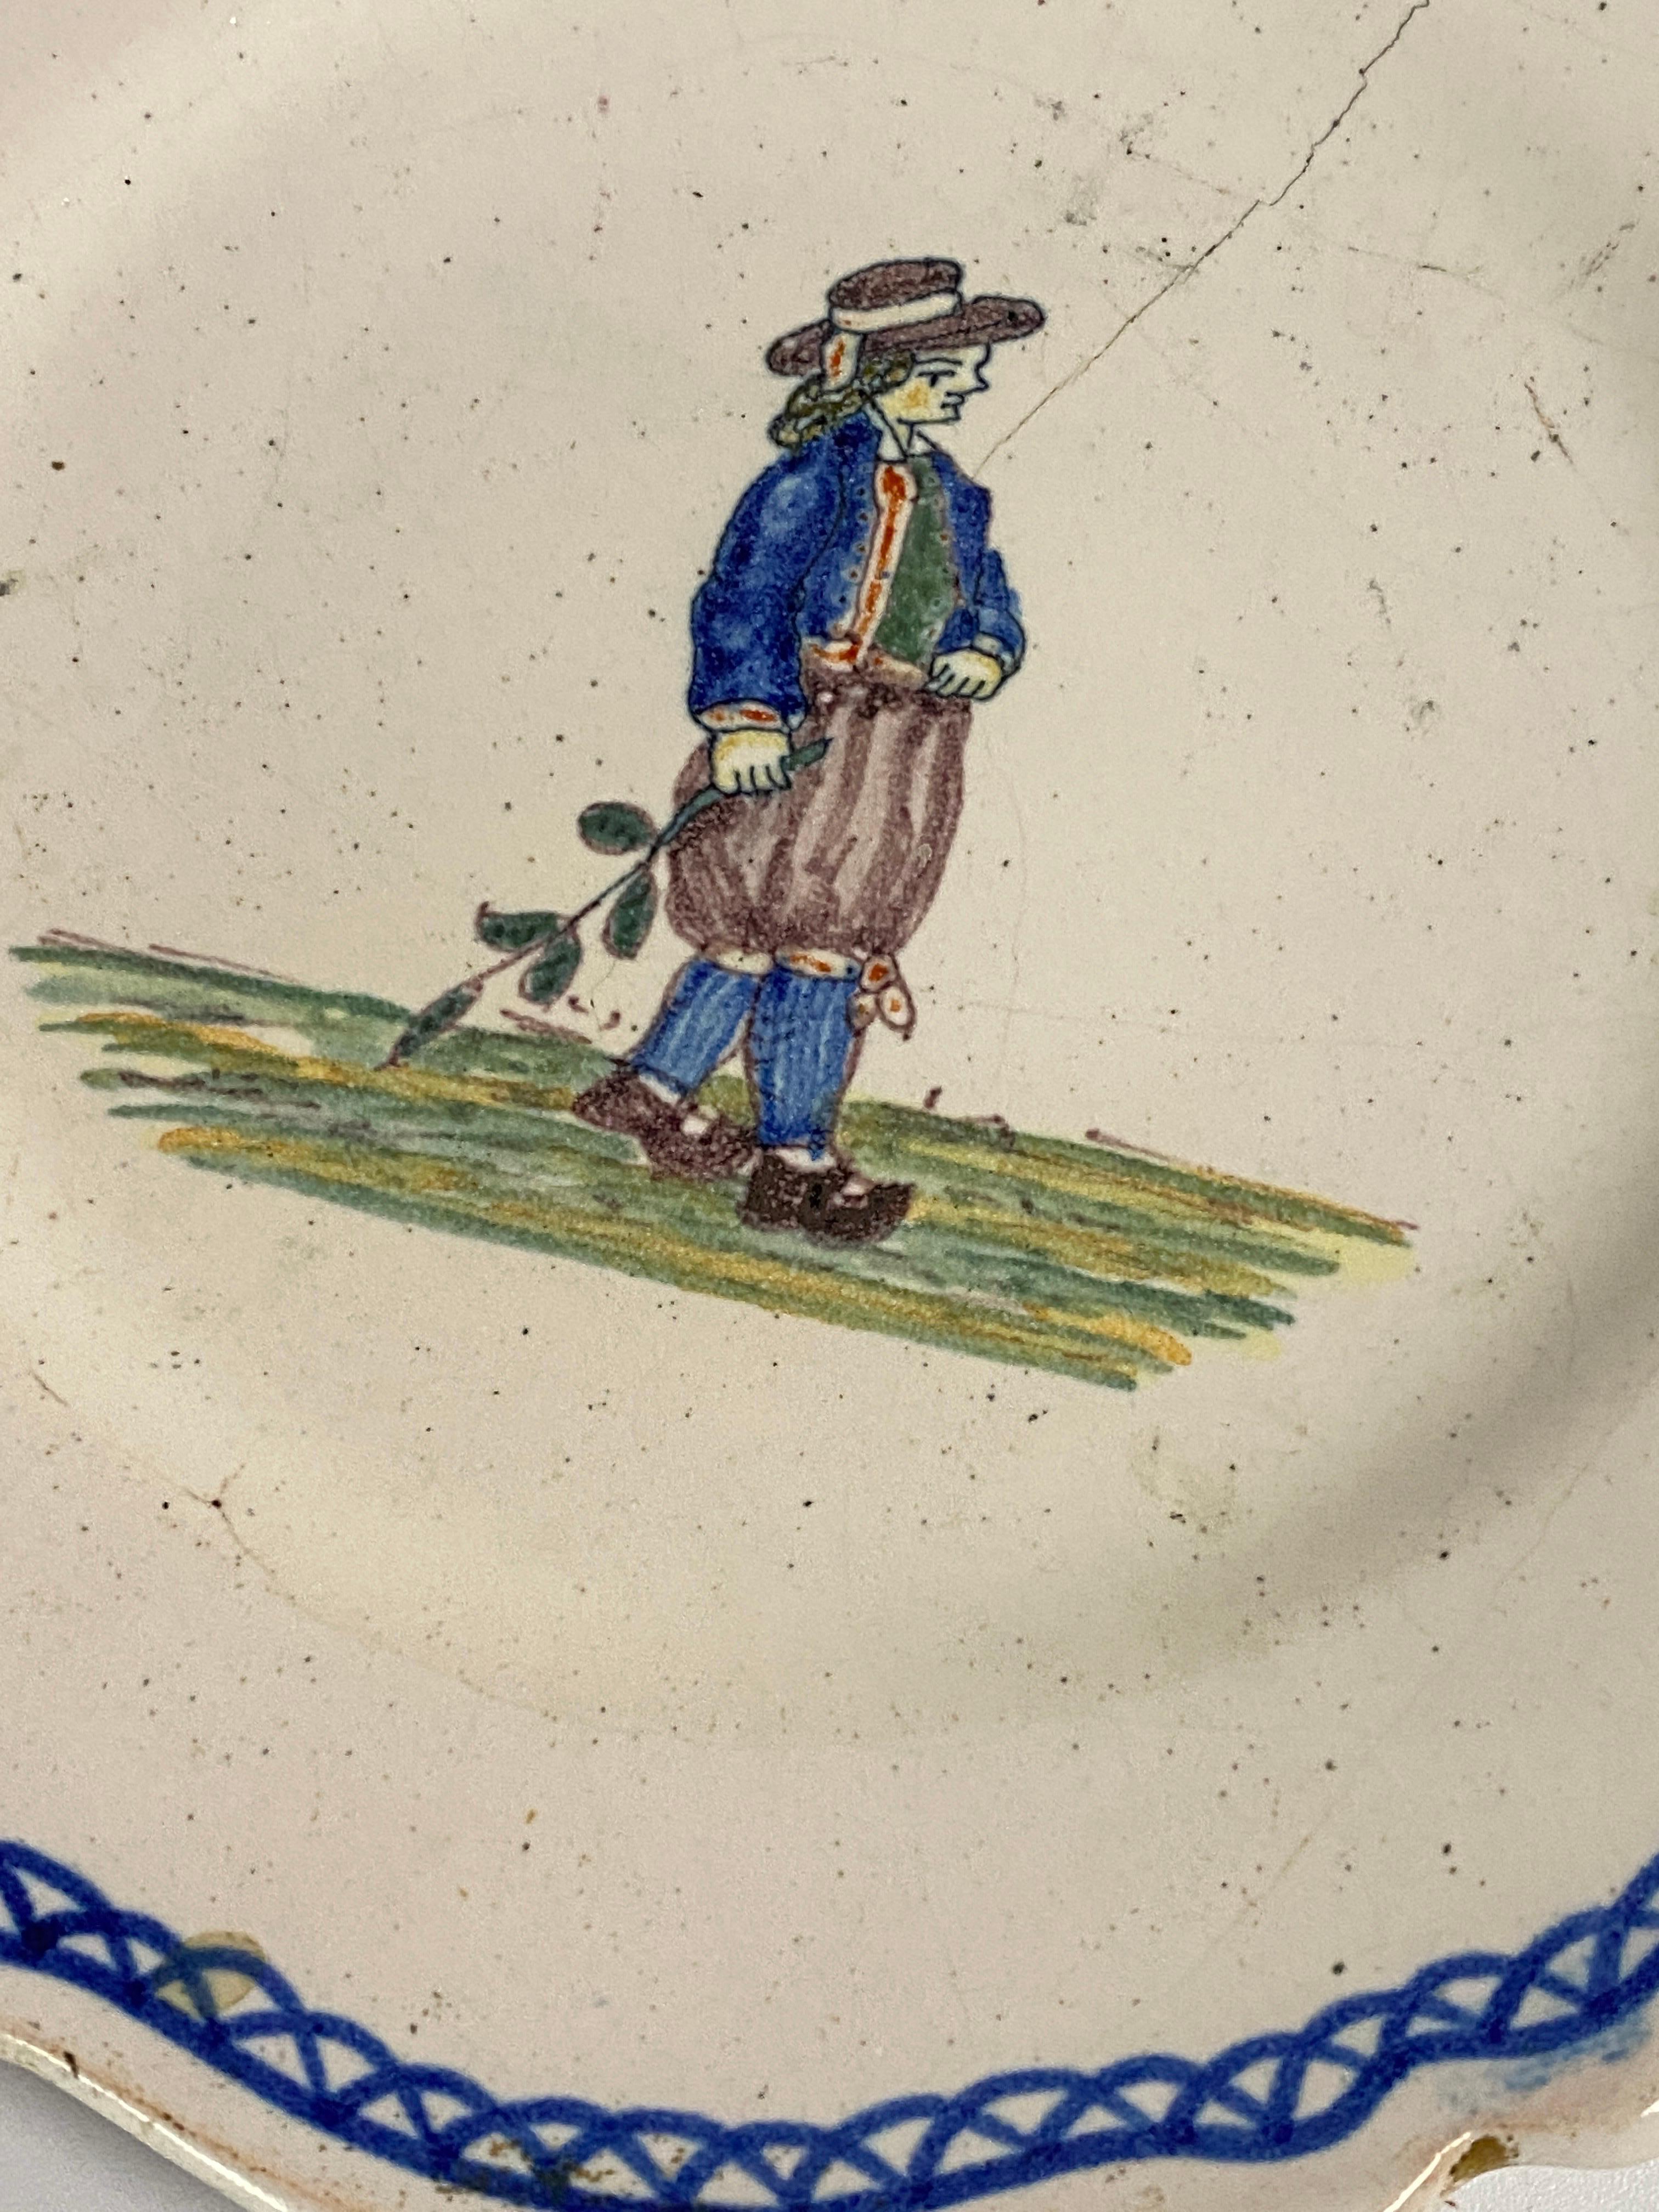 It is an Faience plate, made in the 19th century by Moustier, the colors are white blue green. It is signed on the back, with an X representing the monogram of Moustier.